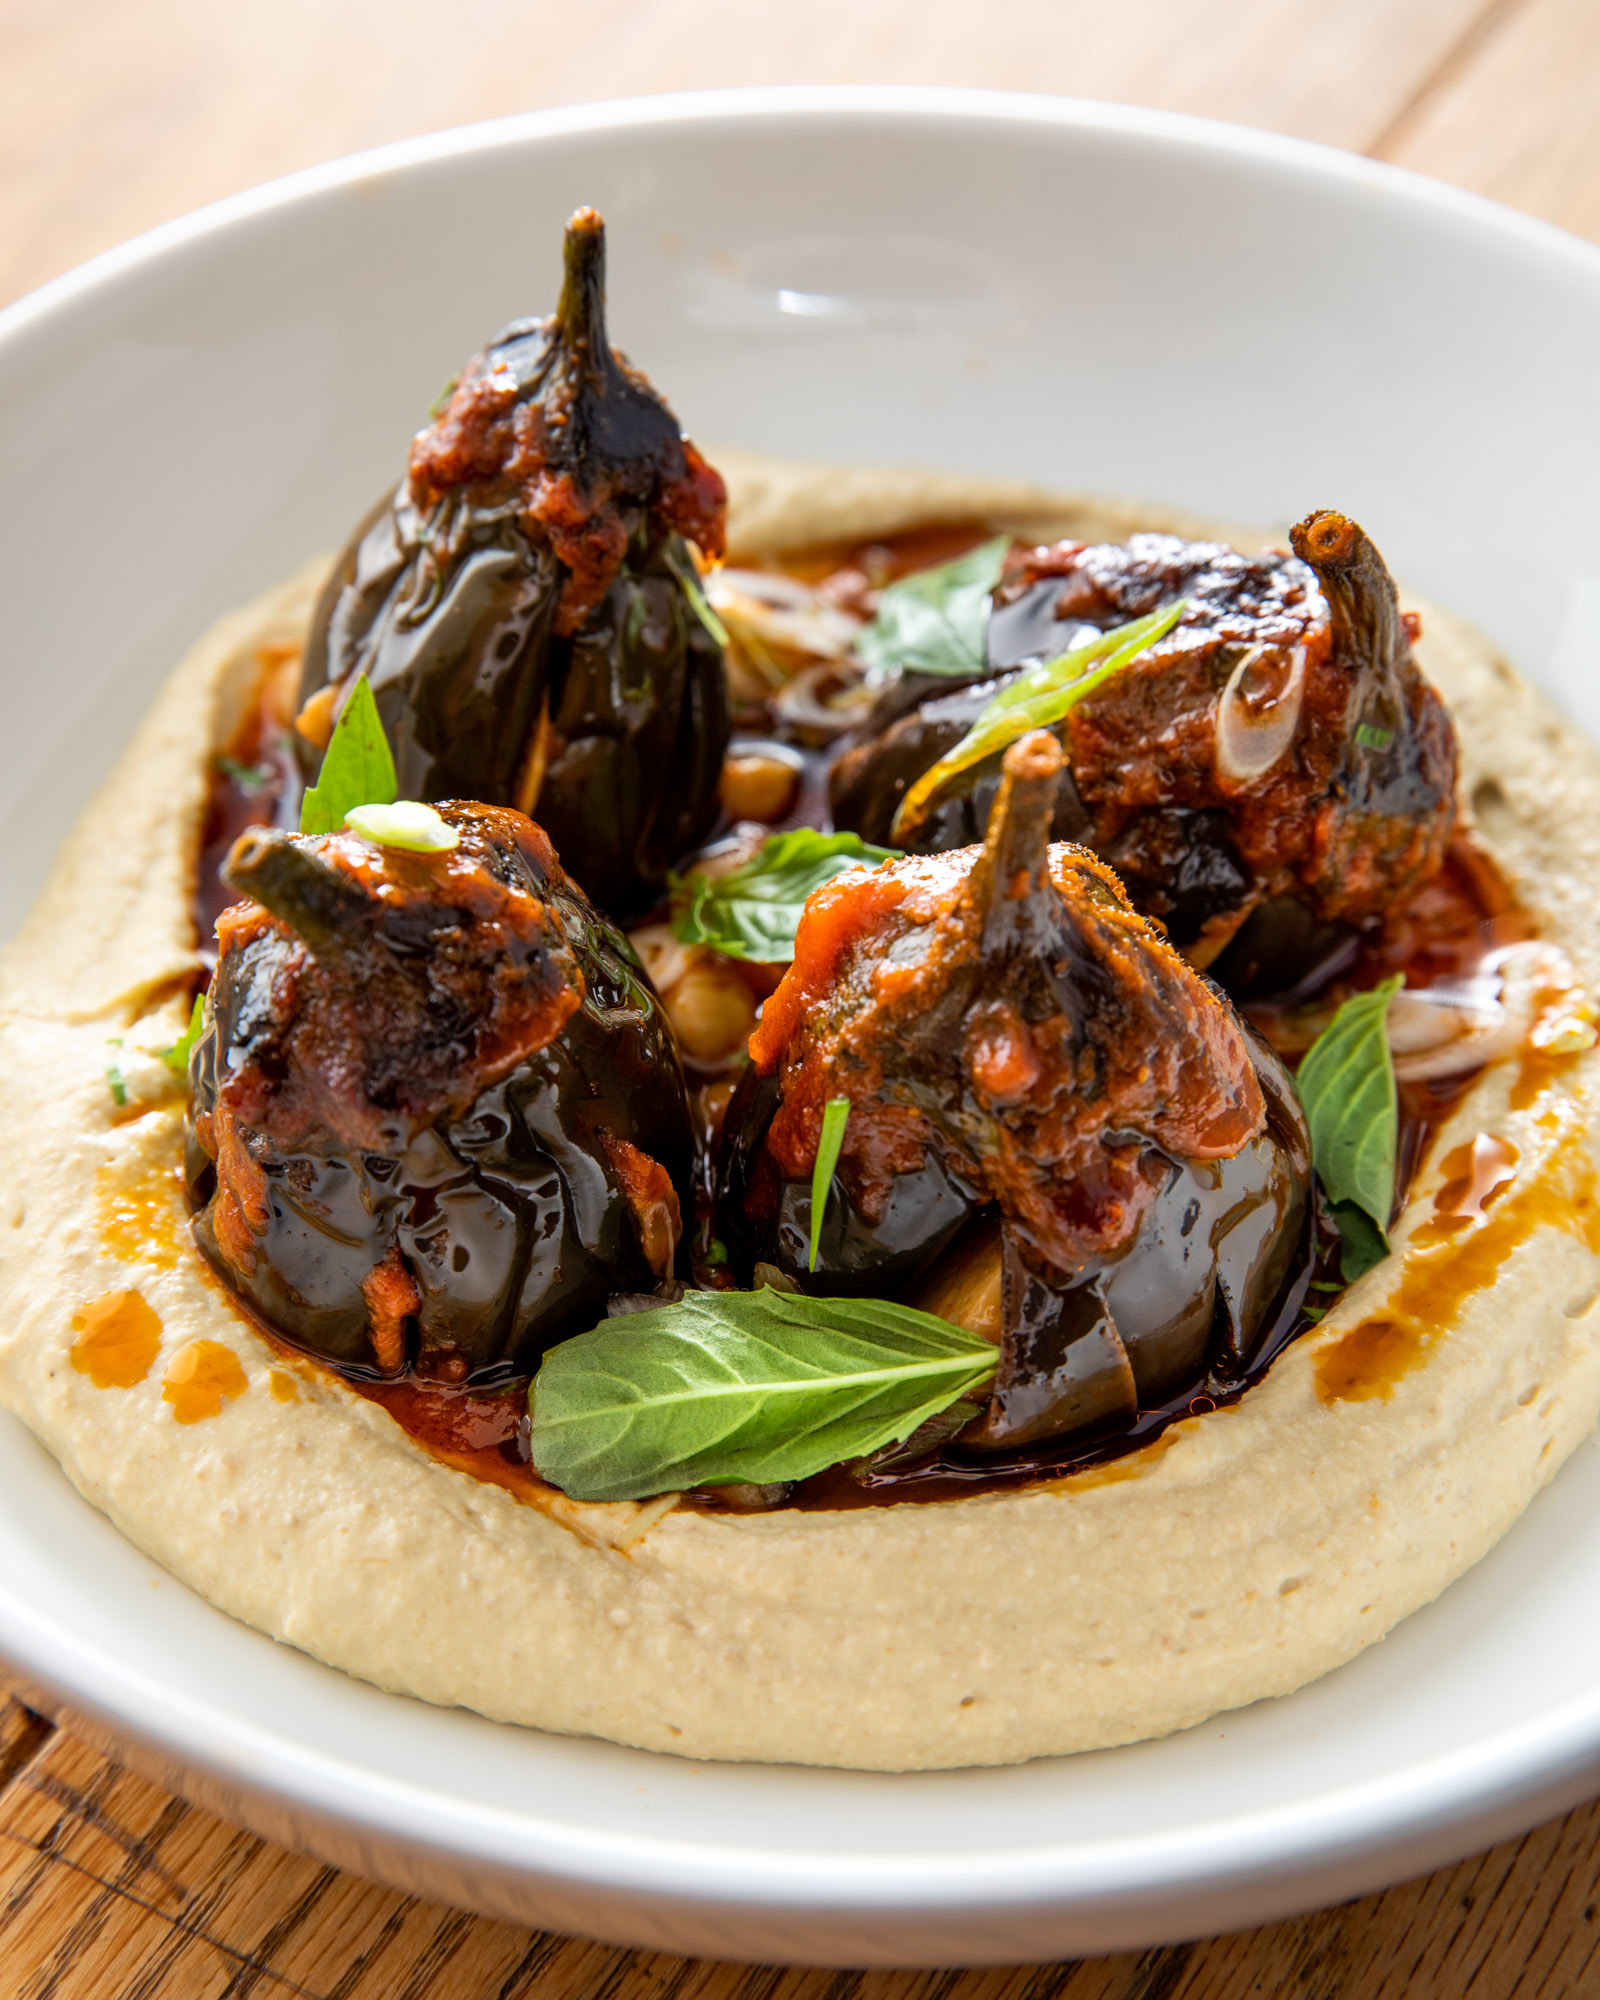 Eggplant sitting in a bed of hummus.